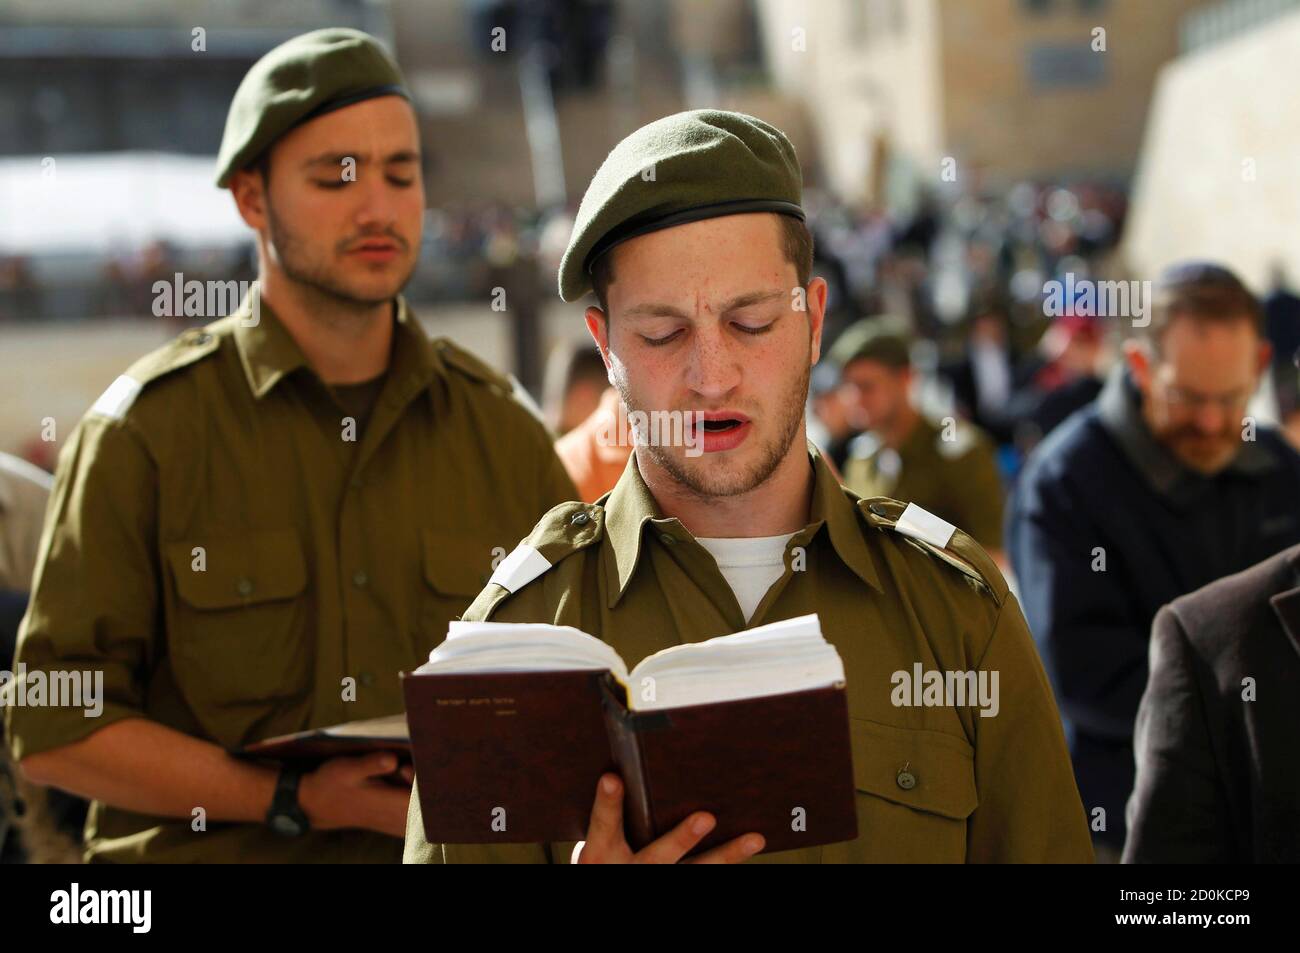 Israeli soldiers pray at the Western Wall, Judaism's holiest prayer site, in Jerusalem's Old City February 22, 2012. The Israeli Defence Force (IDF) has always been a 'Jewish' army. Its rations are kosher, its chaplains are rabbis, and it operates - with the exception of wartime - around the festival calendar. It has never drafted soldiers from Israel's 20-percent Arab minority. But its Jewish identity has always been more cultural than religious. IDF personnel data suggests that's changing. Around 57 percent of Israel's Jewish majority, census figures show, define themselves as religiously ob Stock Photo